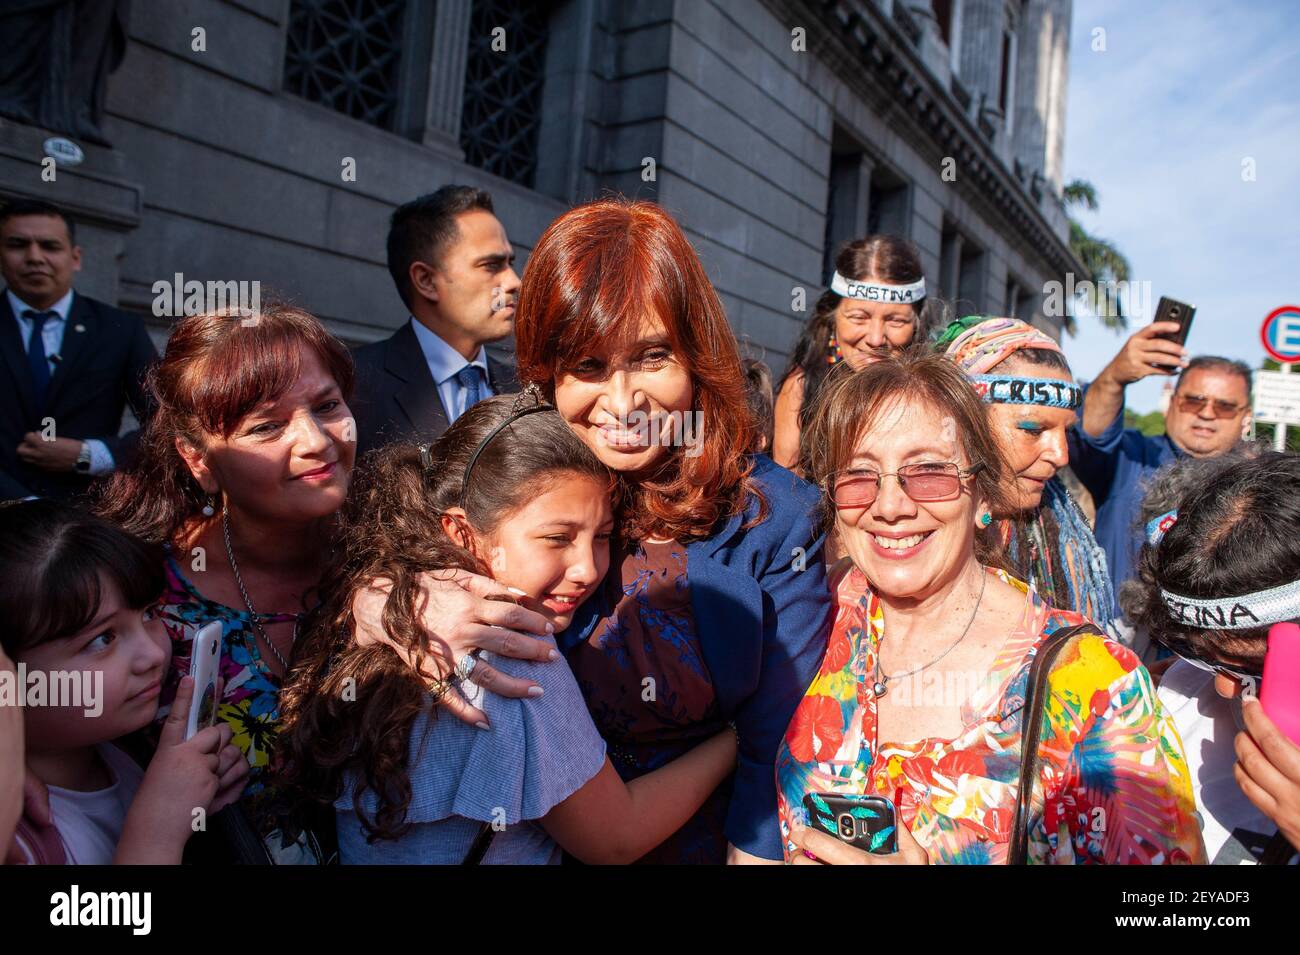 Argentina's Vice President, Cristina Fernandez seen exiting the National Congress surrounded by a group of supporters. Stock Photo